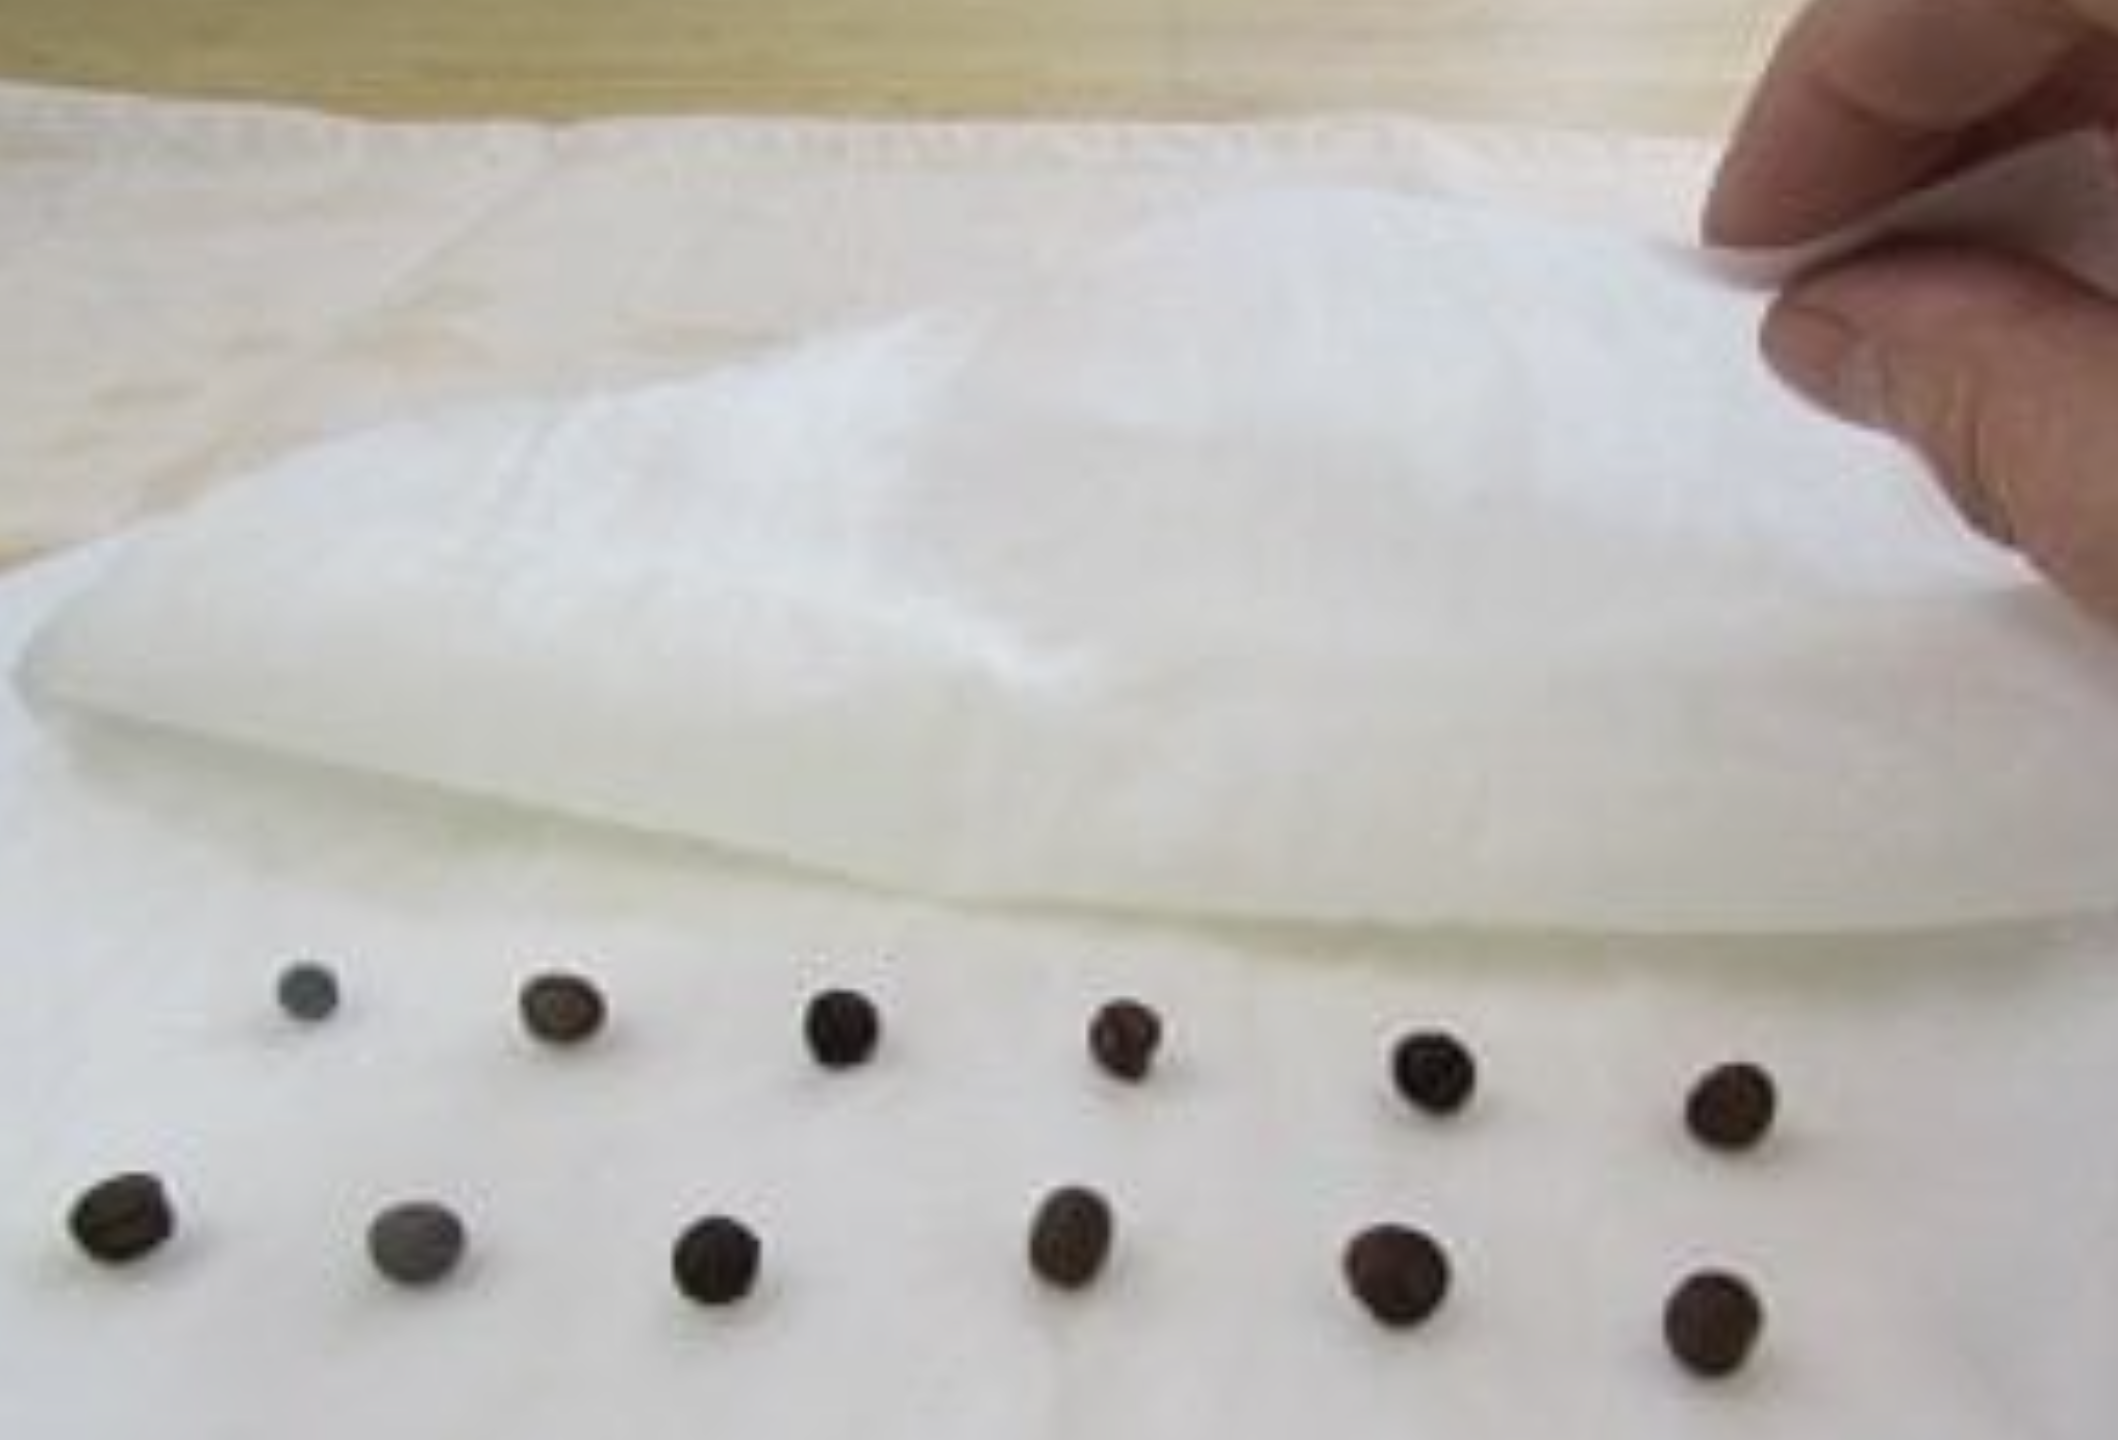 Seeds on Paper Towel Then Fold